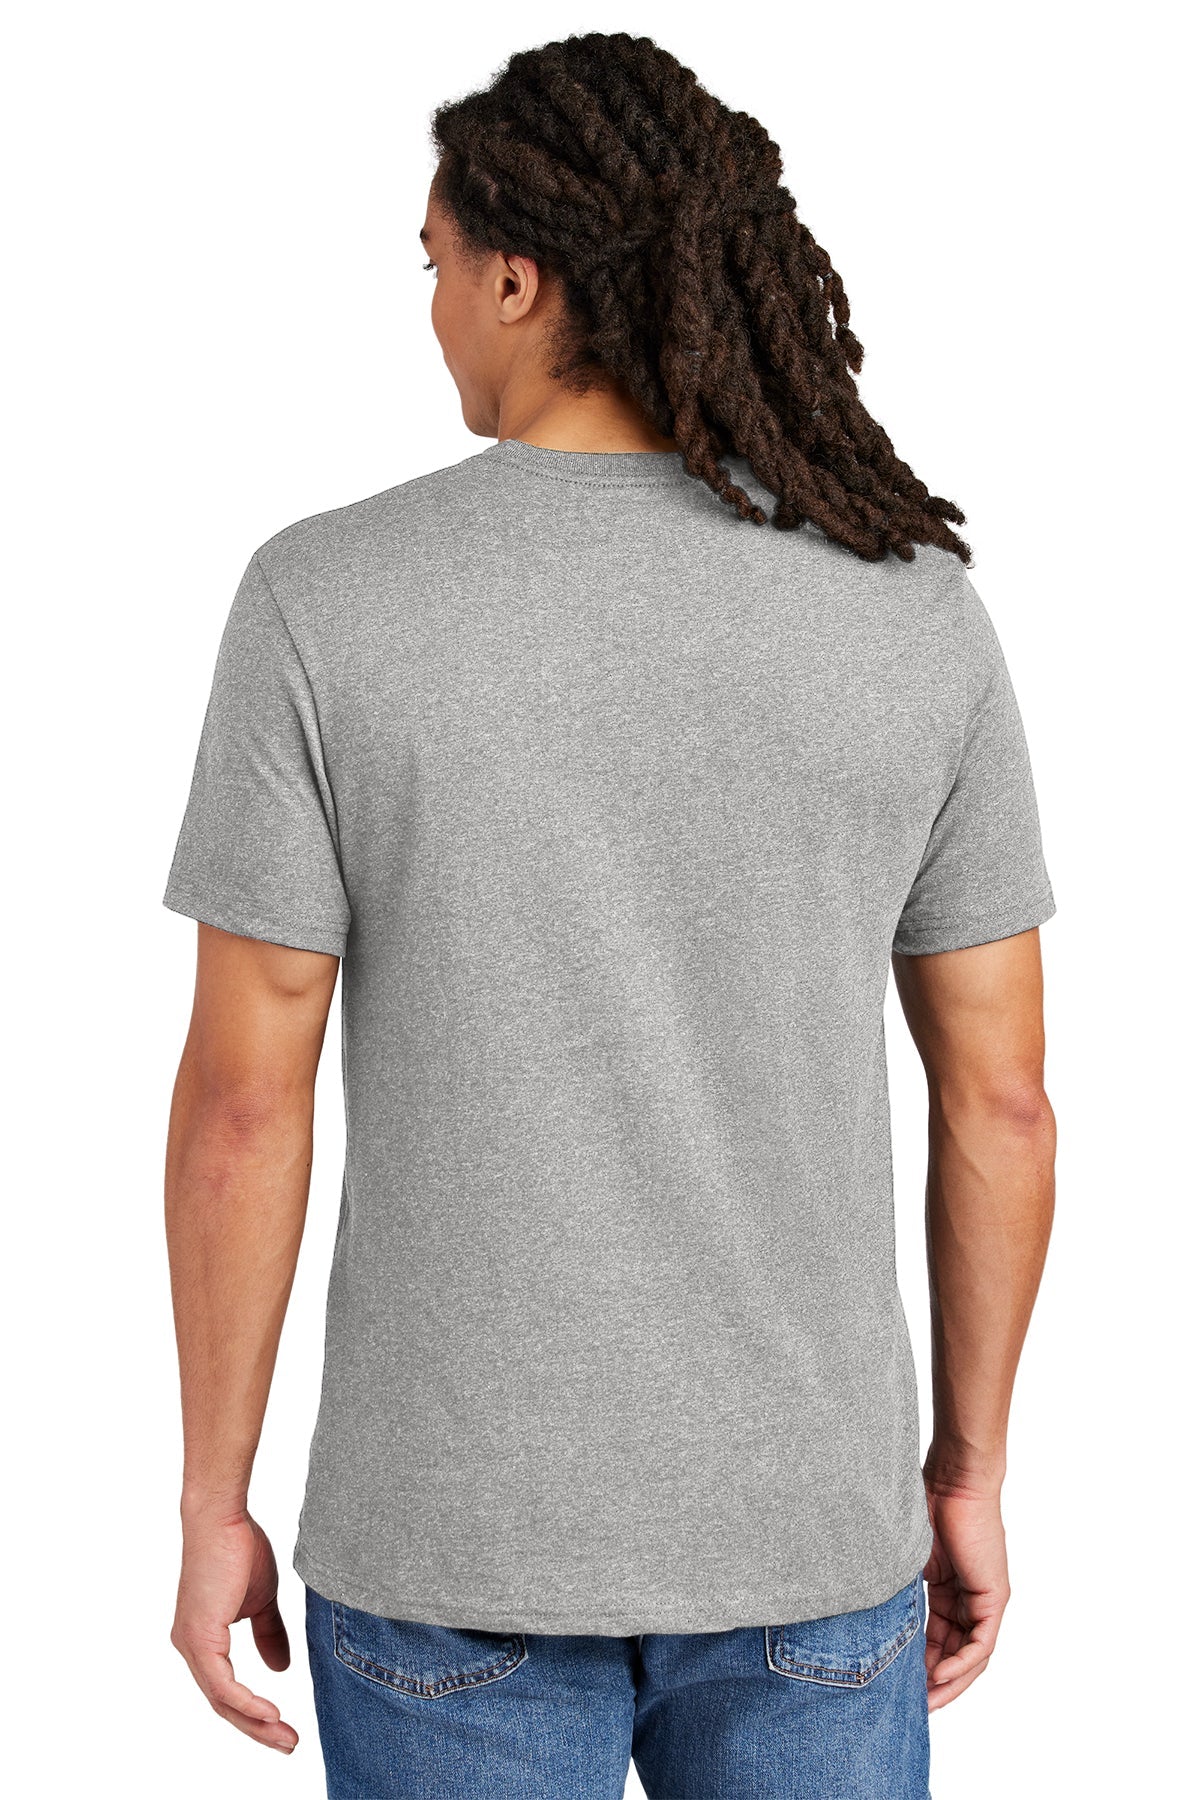 District Men's Tee, Light HeatherGrey [GuidePoint Security]